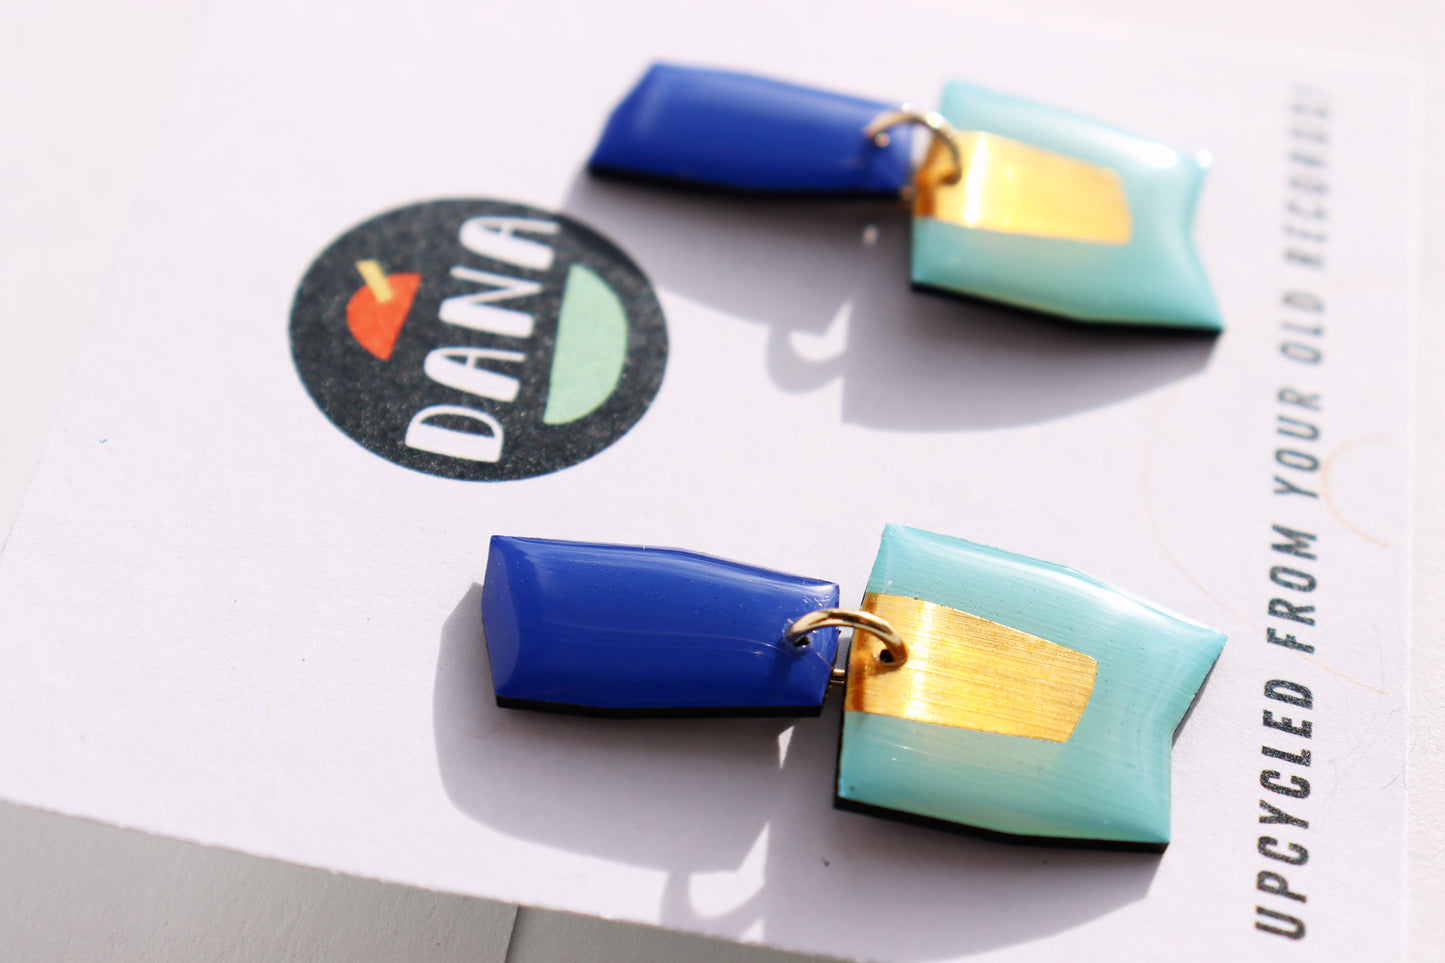 Connie no.2 / Festive contemporary earrings in blue with lush pops of gold